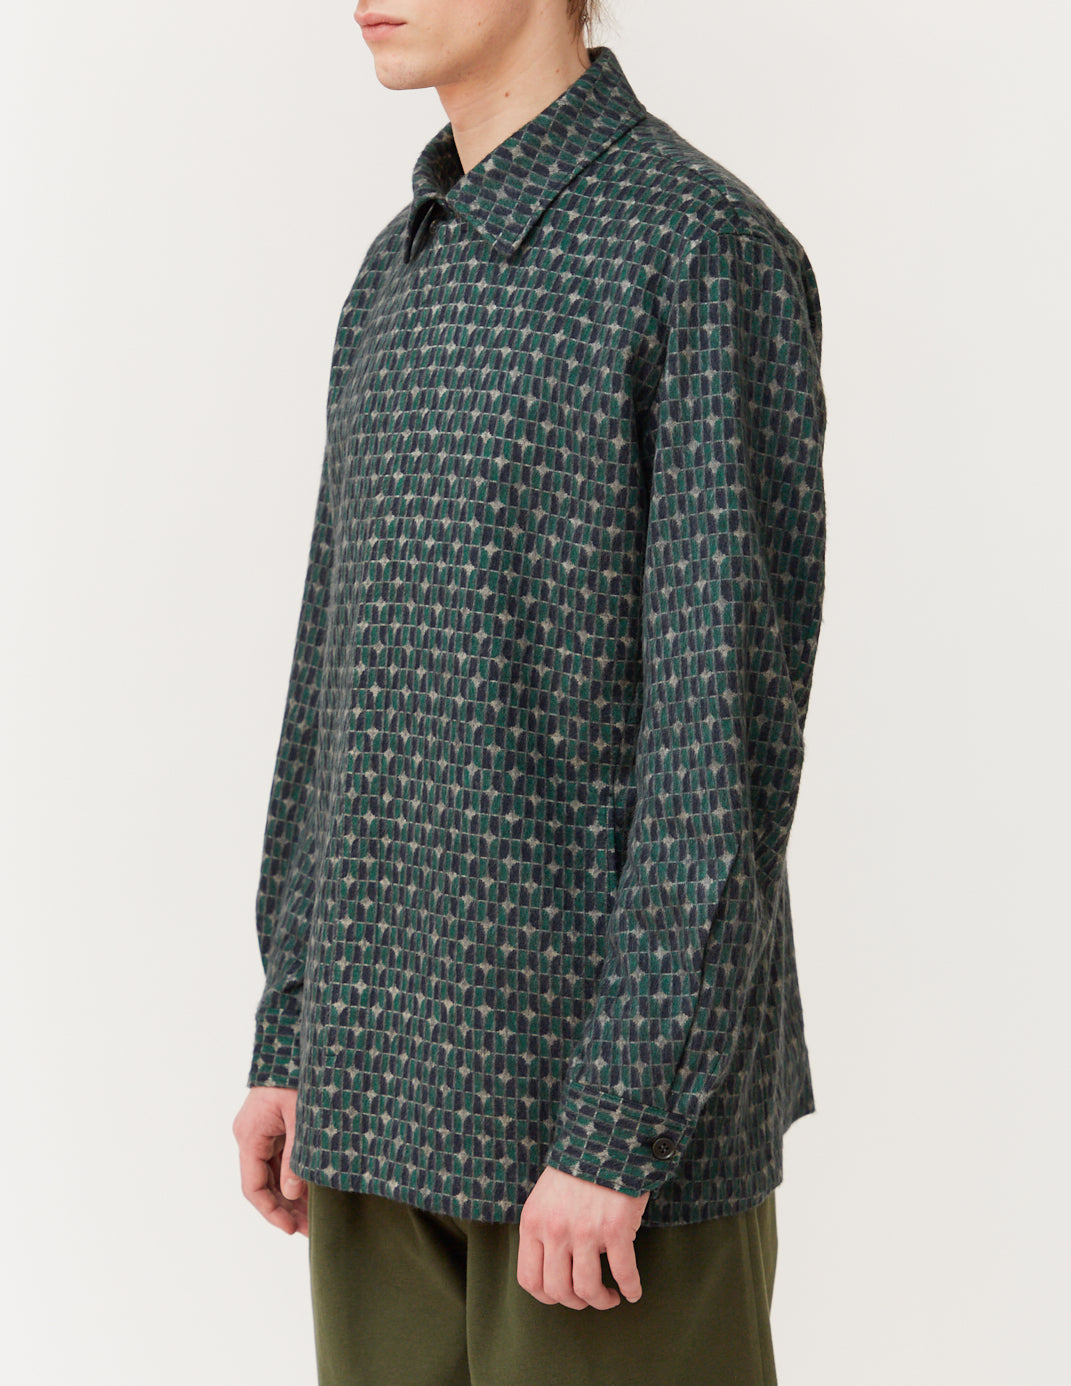 FLY FRONT FULLY LINED SHIRT green x violet panel pattern